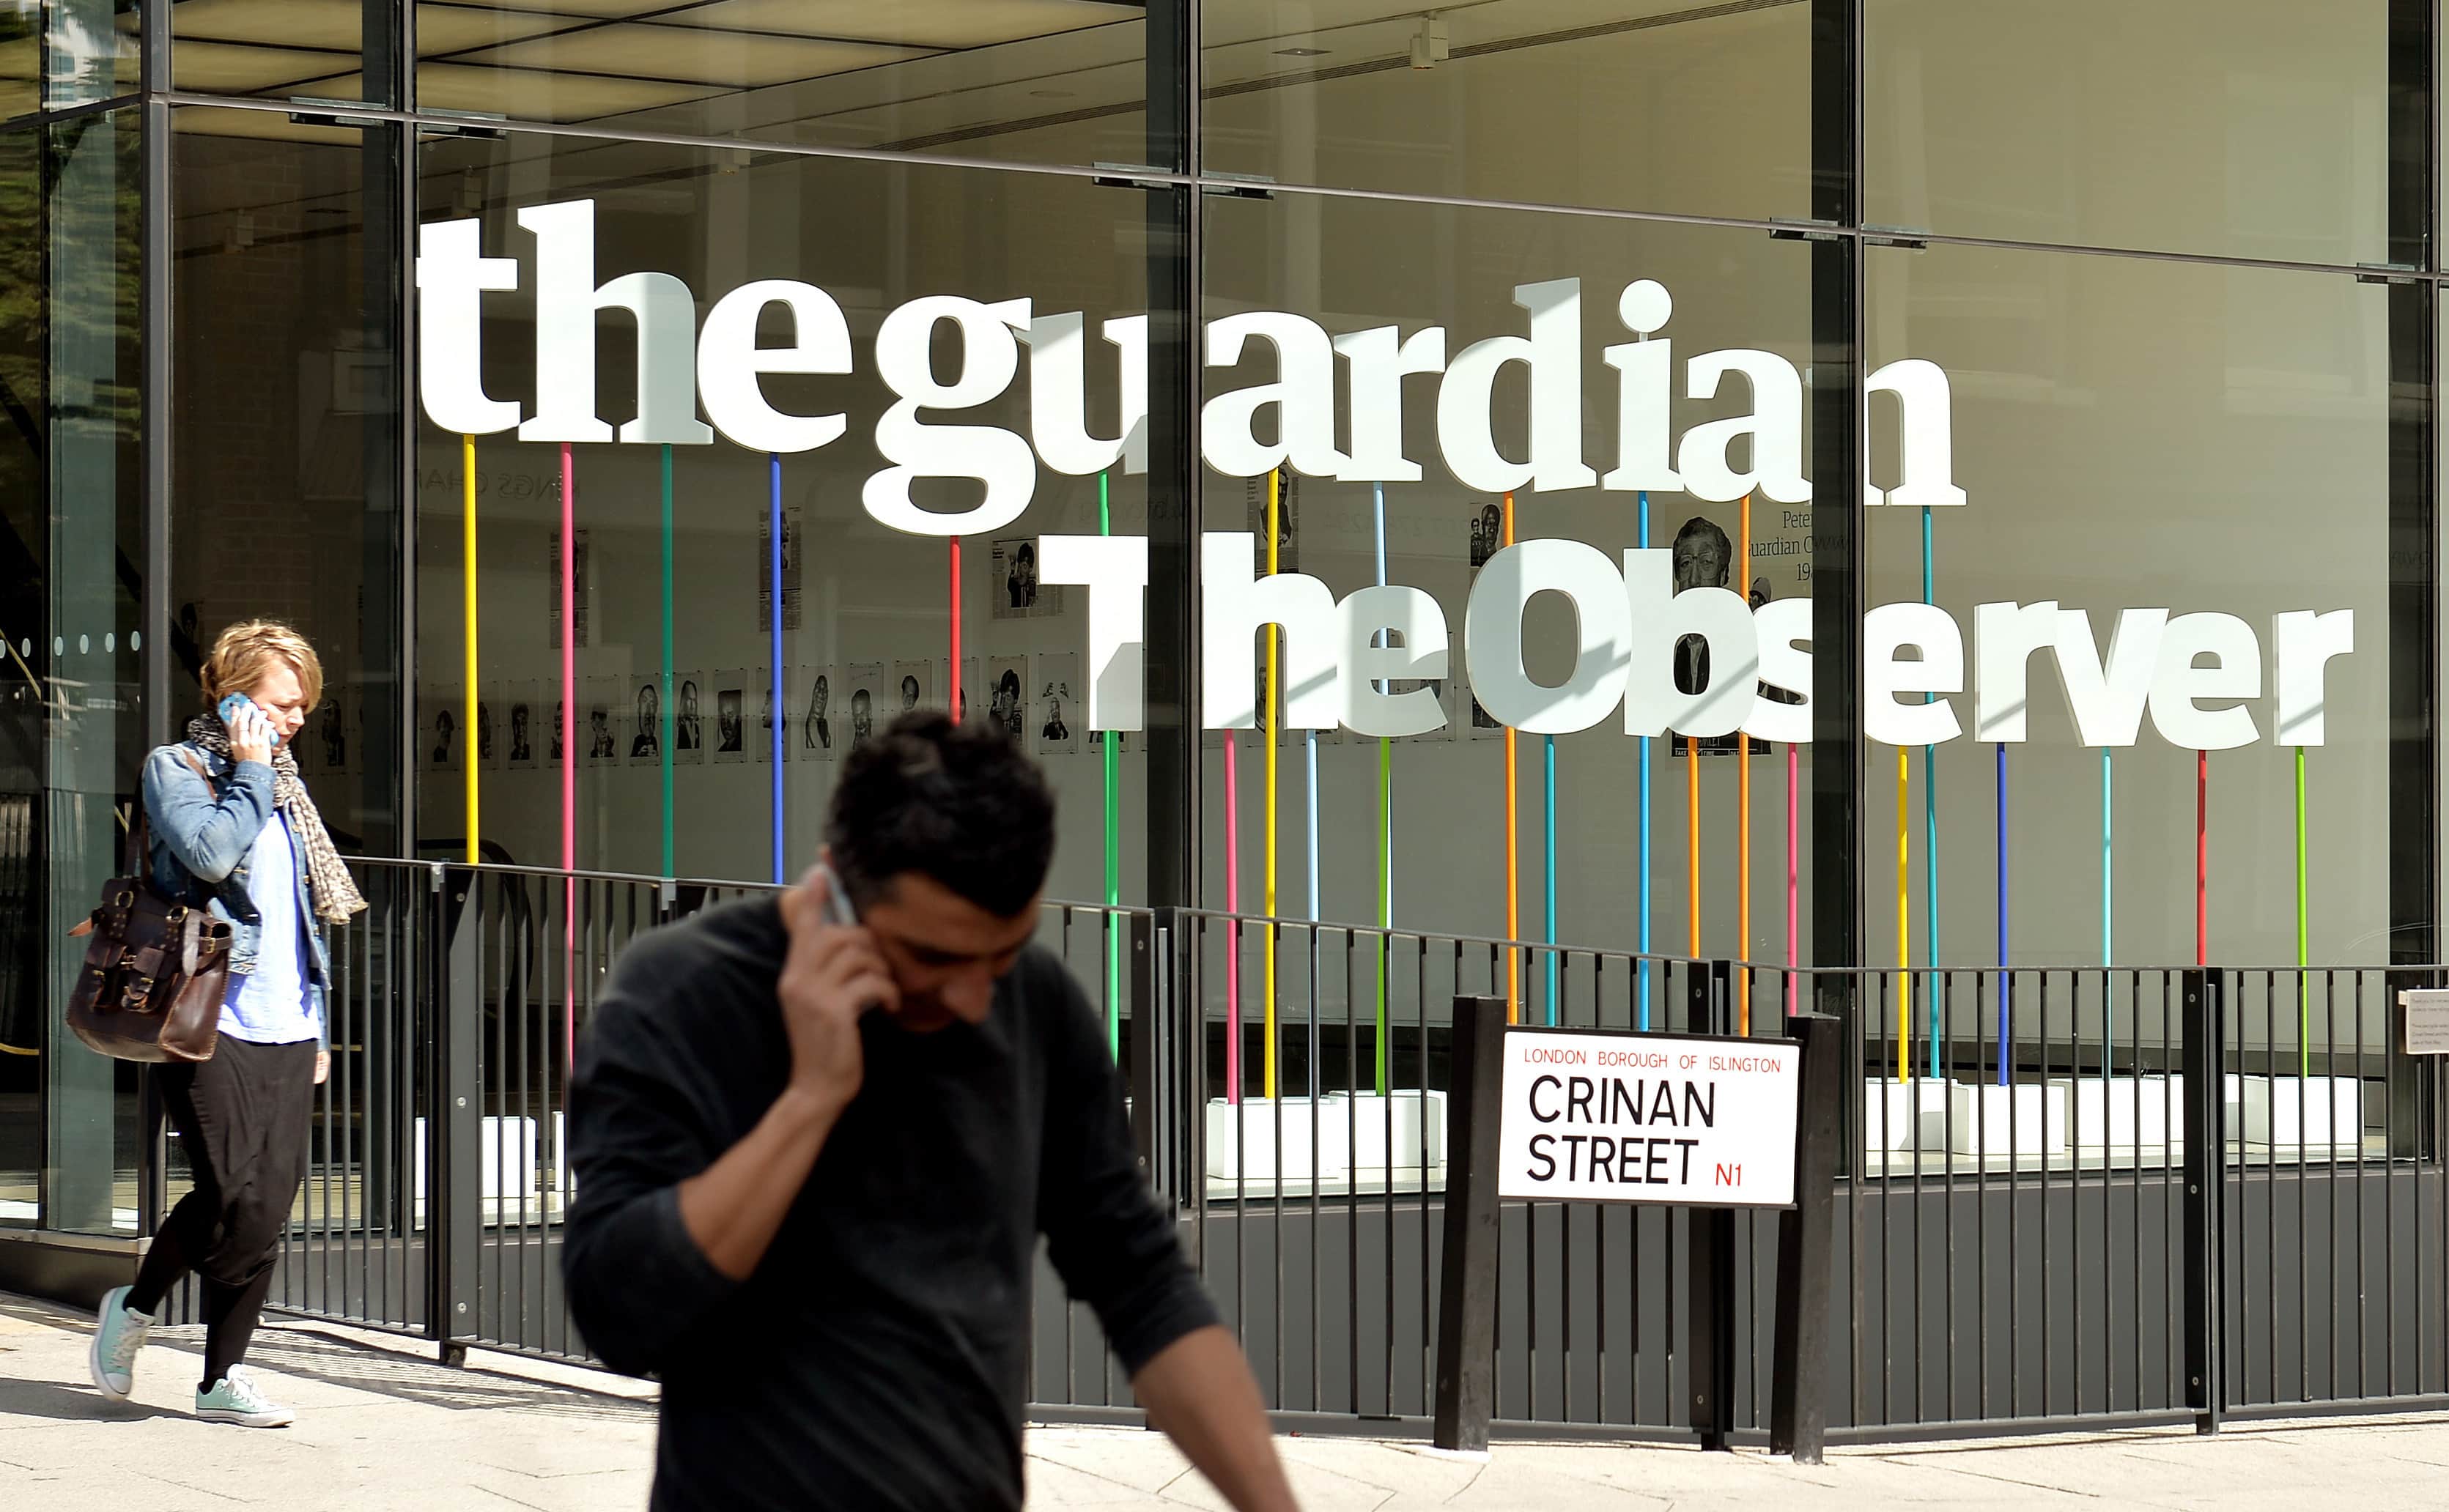 The main entrance of The Guardian newspaper office in north London., John Stillwell/PA Wire/Associated Press